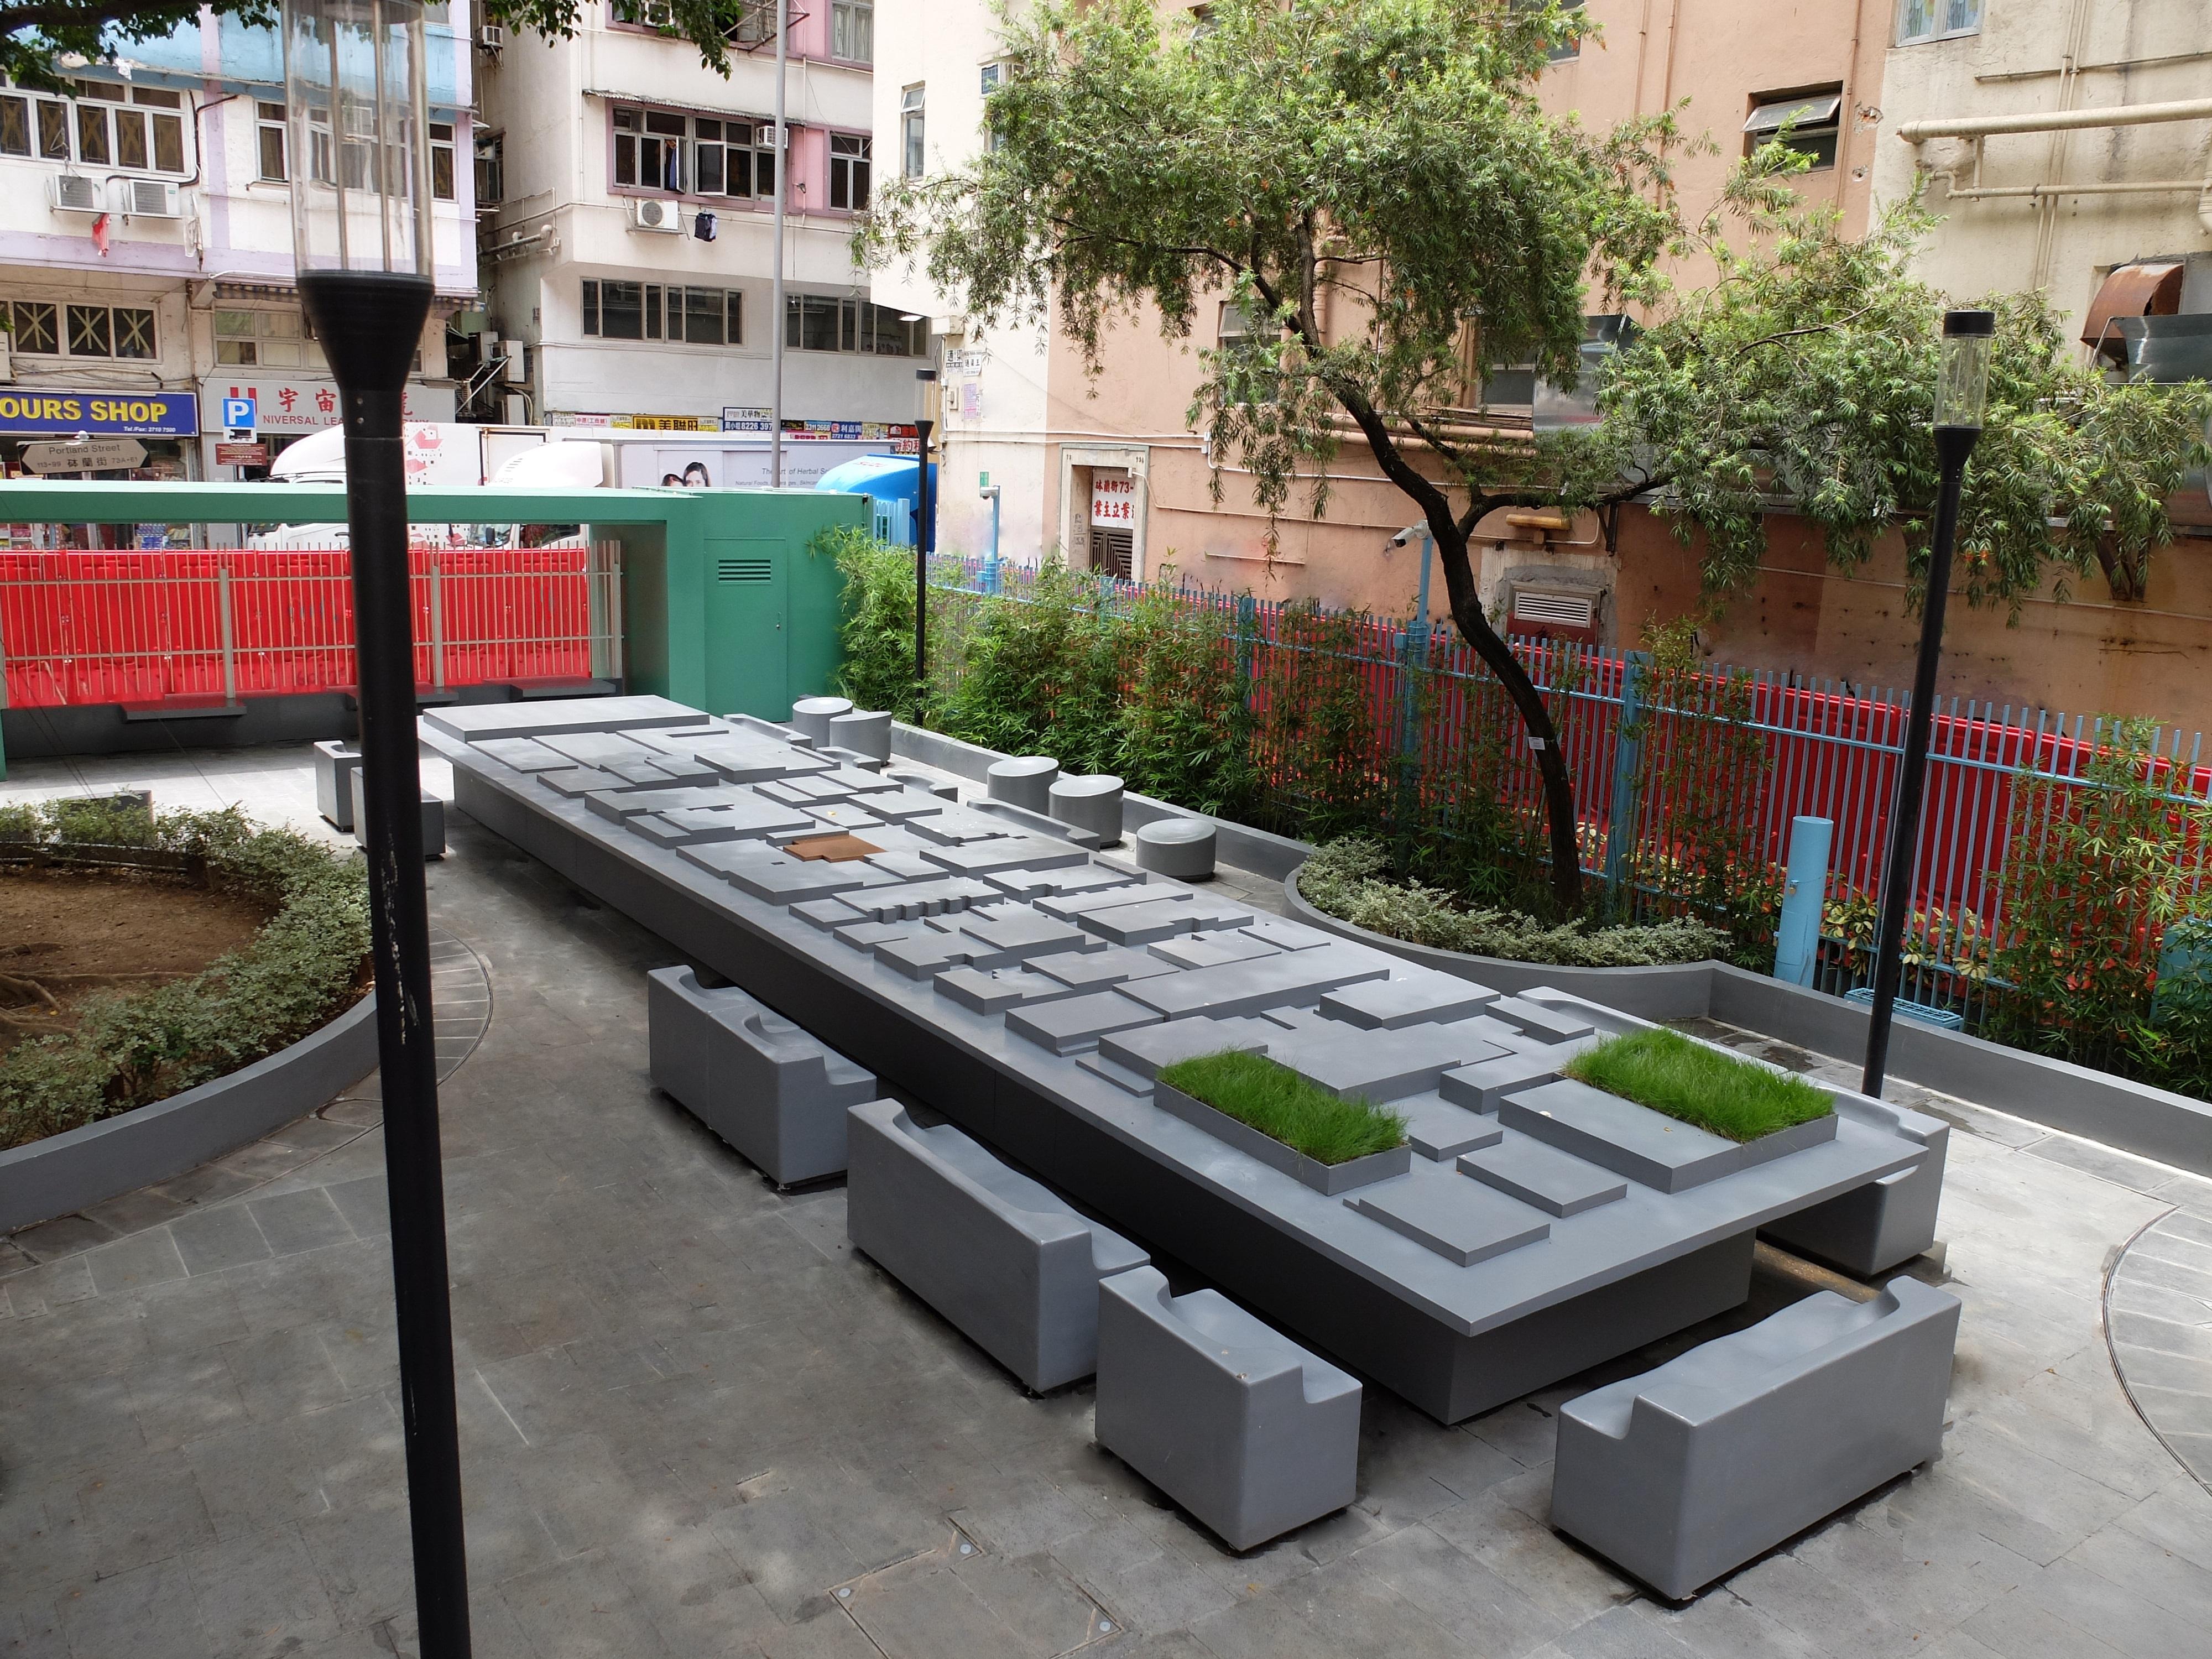 The Leisure and Cultural Services Department announced today (June 30) that refurbishment works for Hamilton Street Rest Garden in Yau Tsim Mong District have been completed. The facilities will reopen tomorrow (July 1) for public use. The improvement project has transformed the garden into an outdoor space where people can share a table with others. A large-scale communal table is placed at the centre of the garden, surrounded by uniquely designed seating.